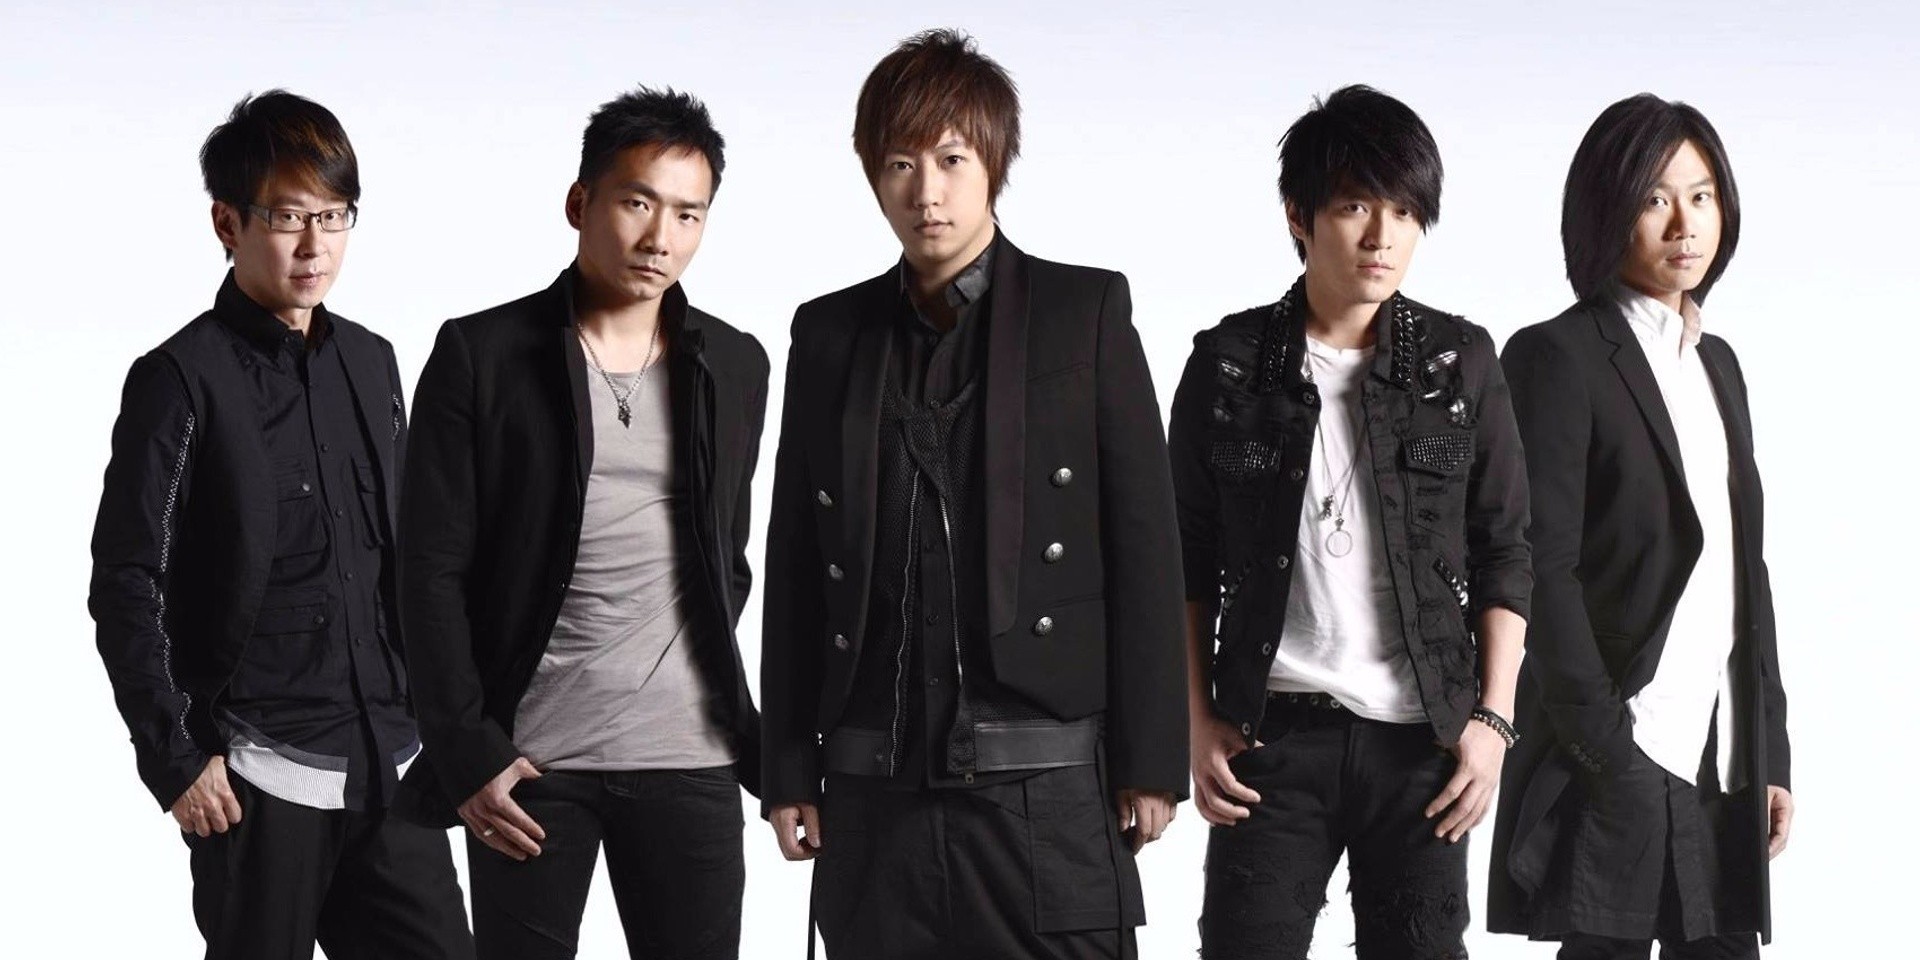 Taiwanese "king of concert" Mayday plan a two-night showcase at the Singapore Indoor Stadium